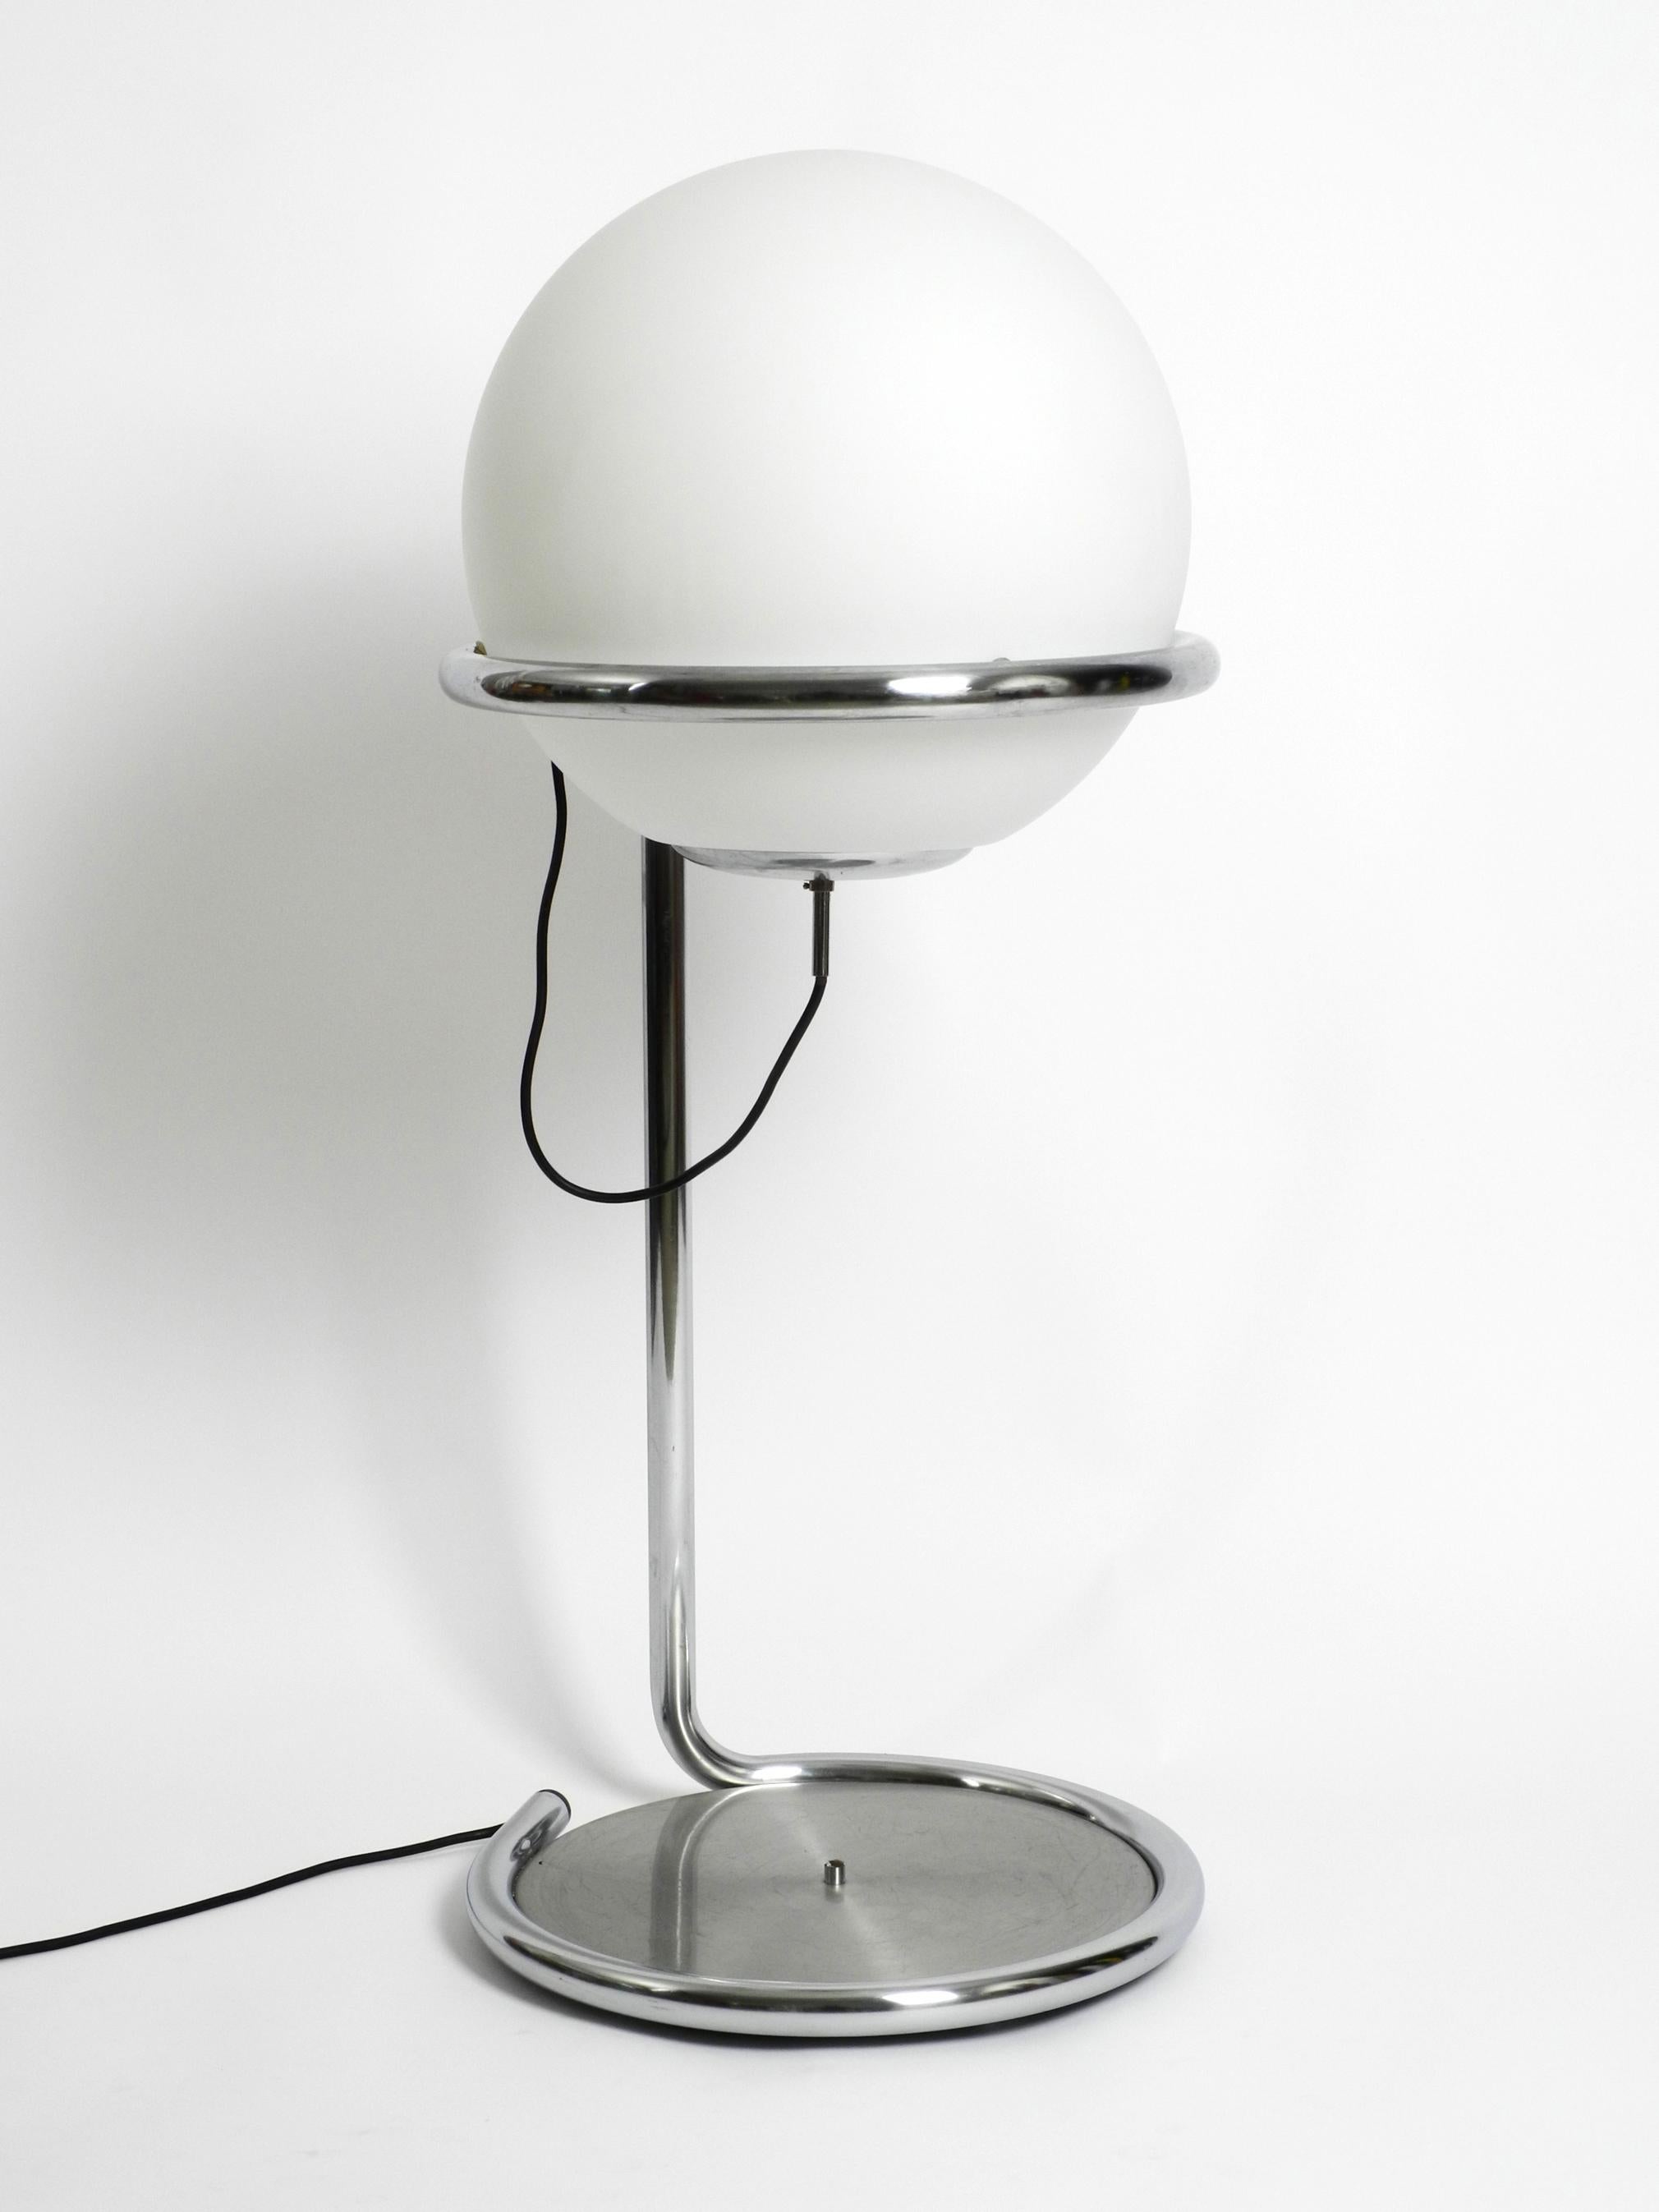 Large Heavy Space Age 1960s Tubular Steel Floor Lamp with Spherical Glass Shade For Sale 8